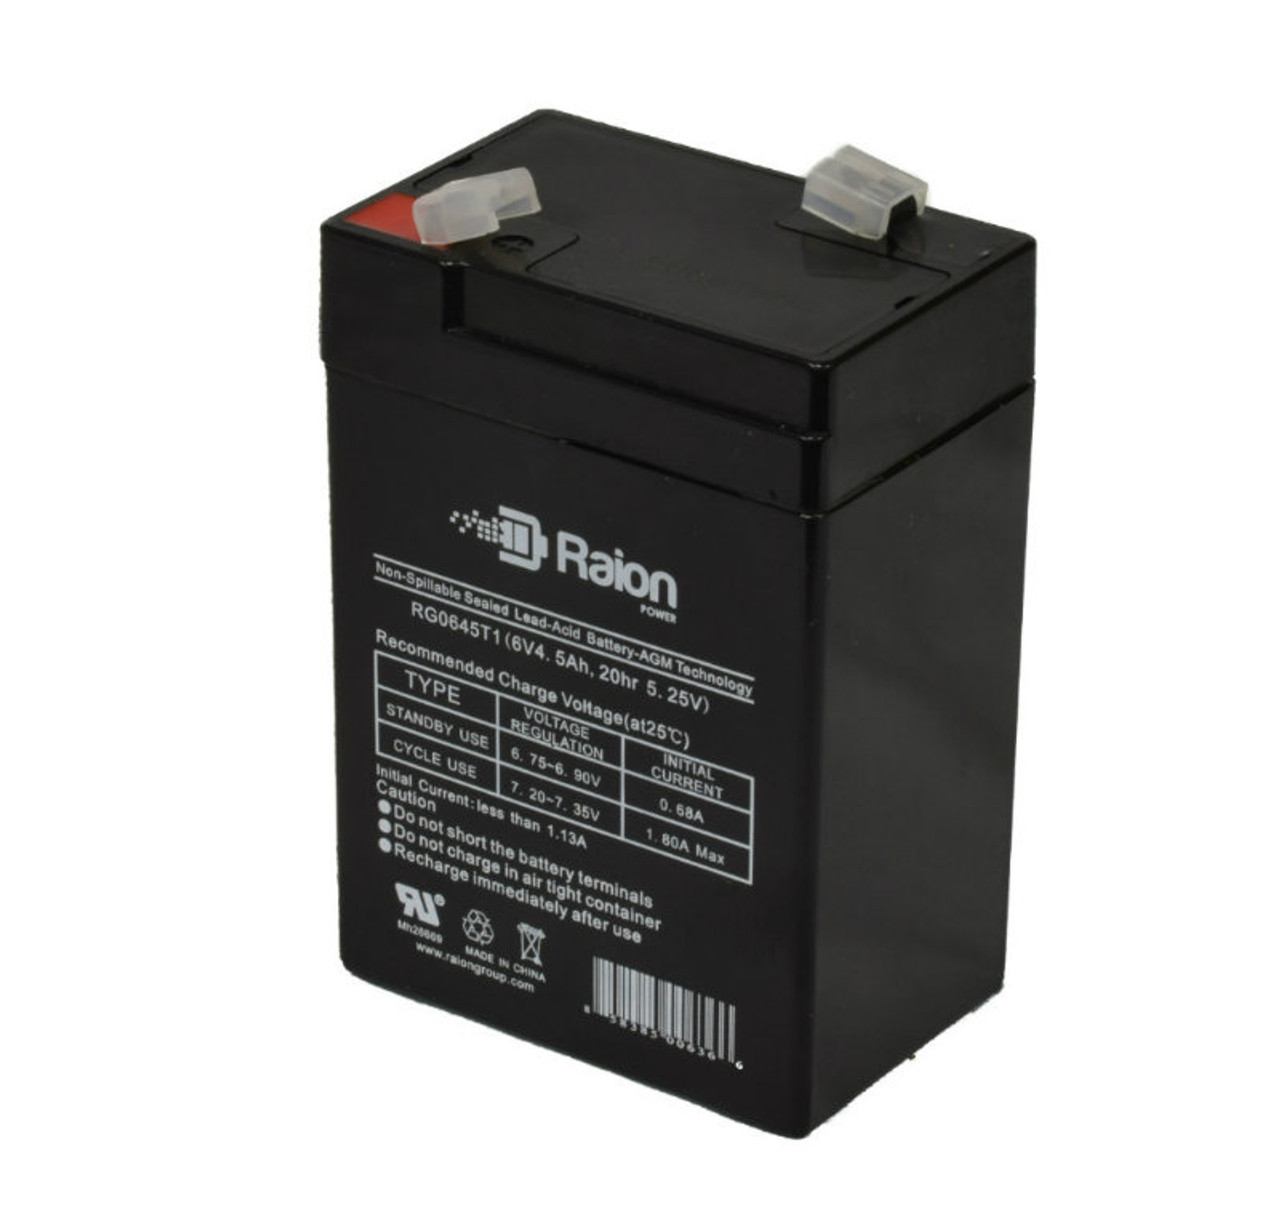 Raion Power RG0645T1 6V 4.5Ah Replacement Battery Cartridge for Edwards 97043201